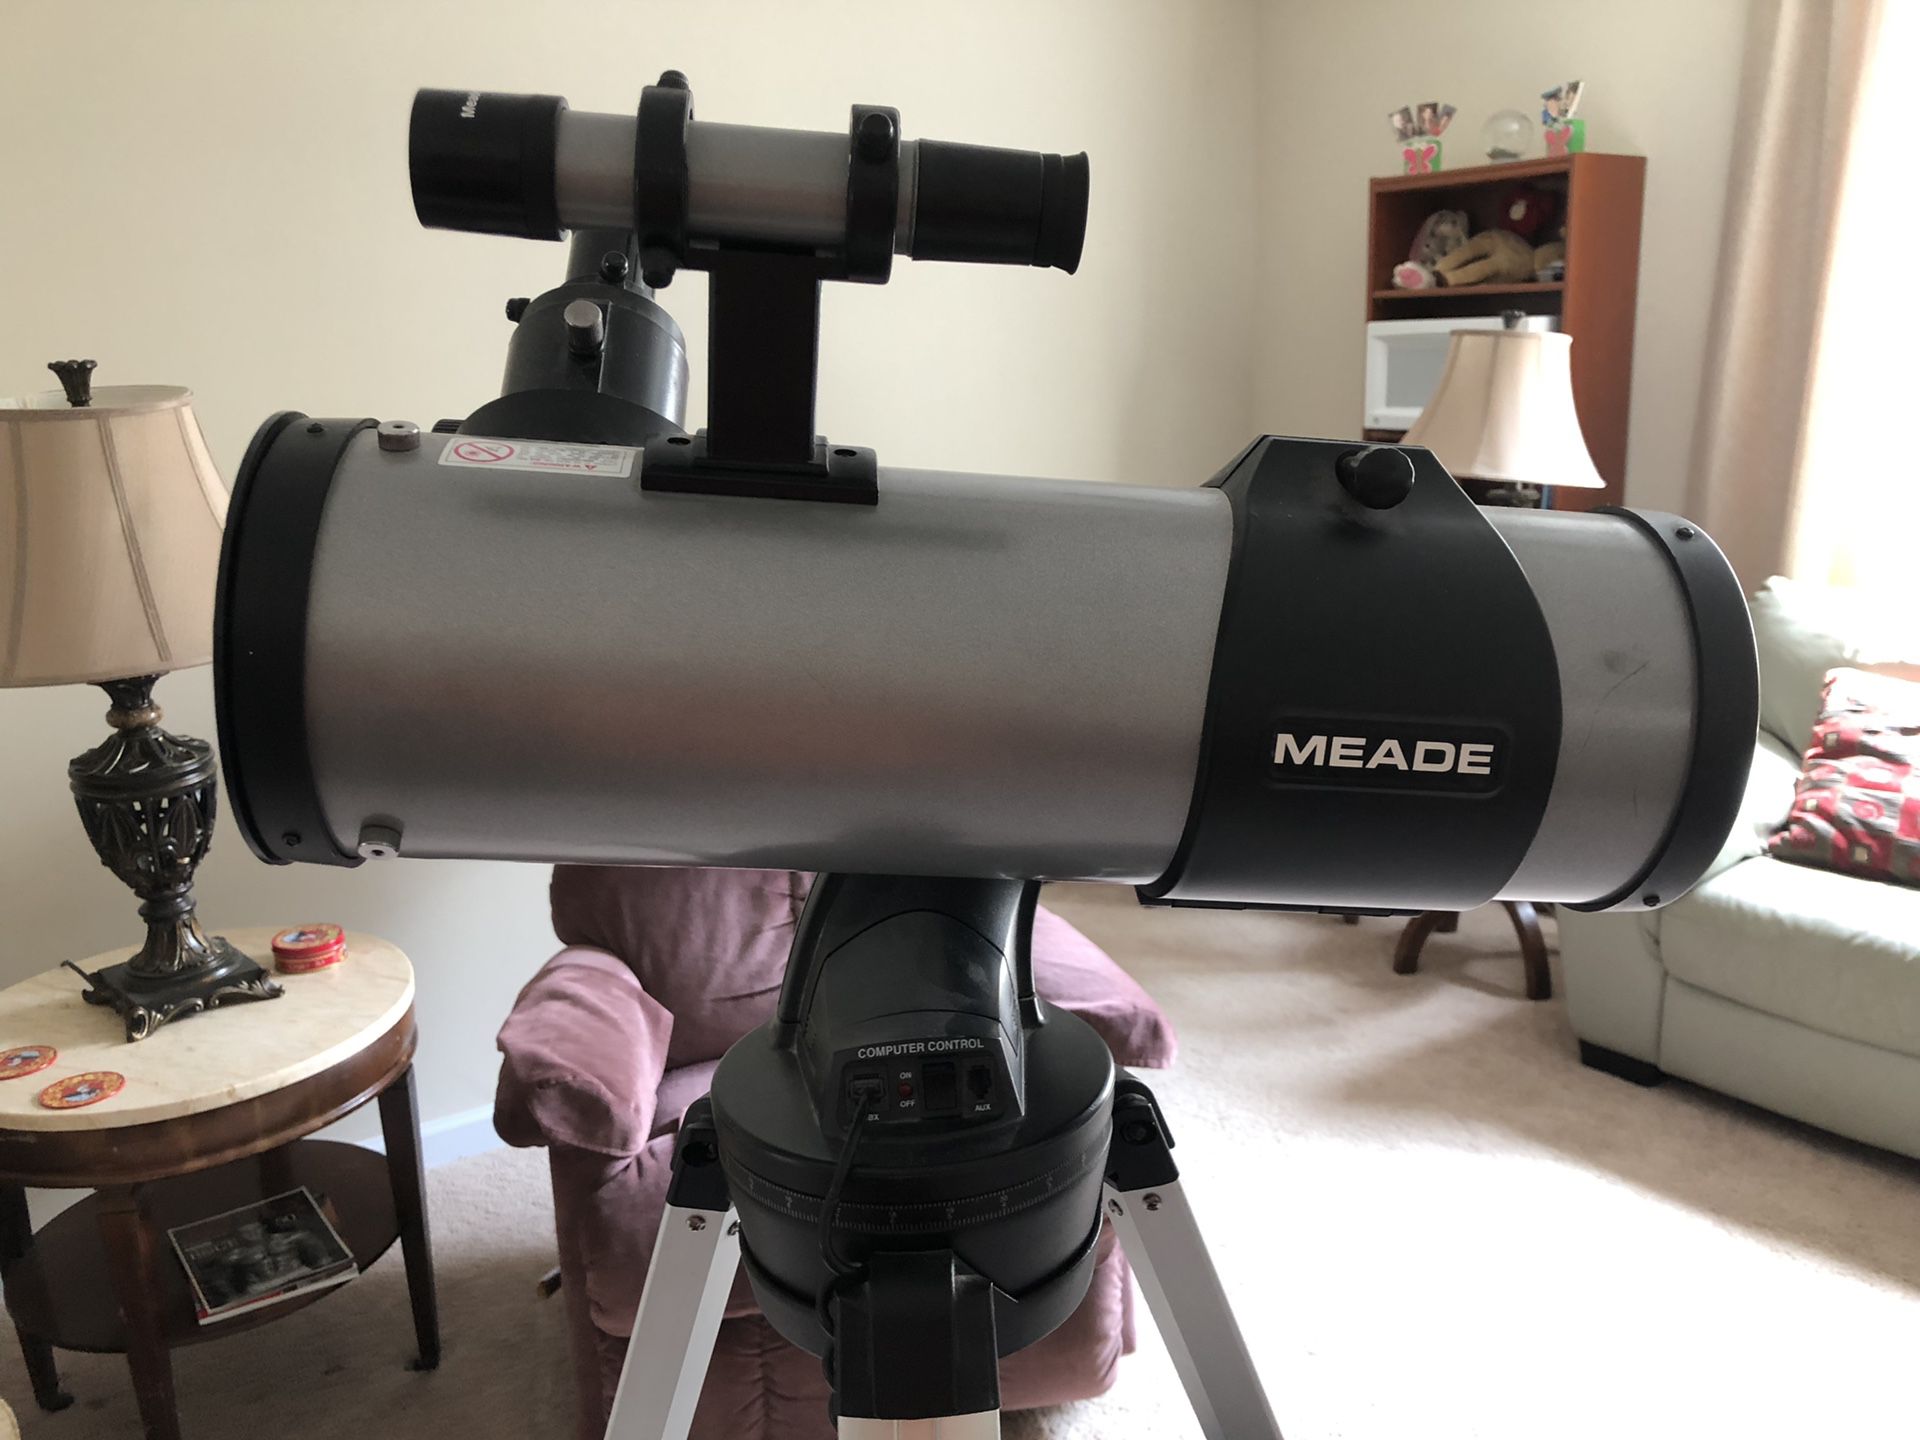 Meade telescope and lenses